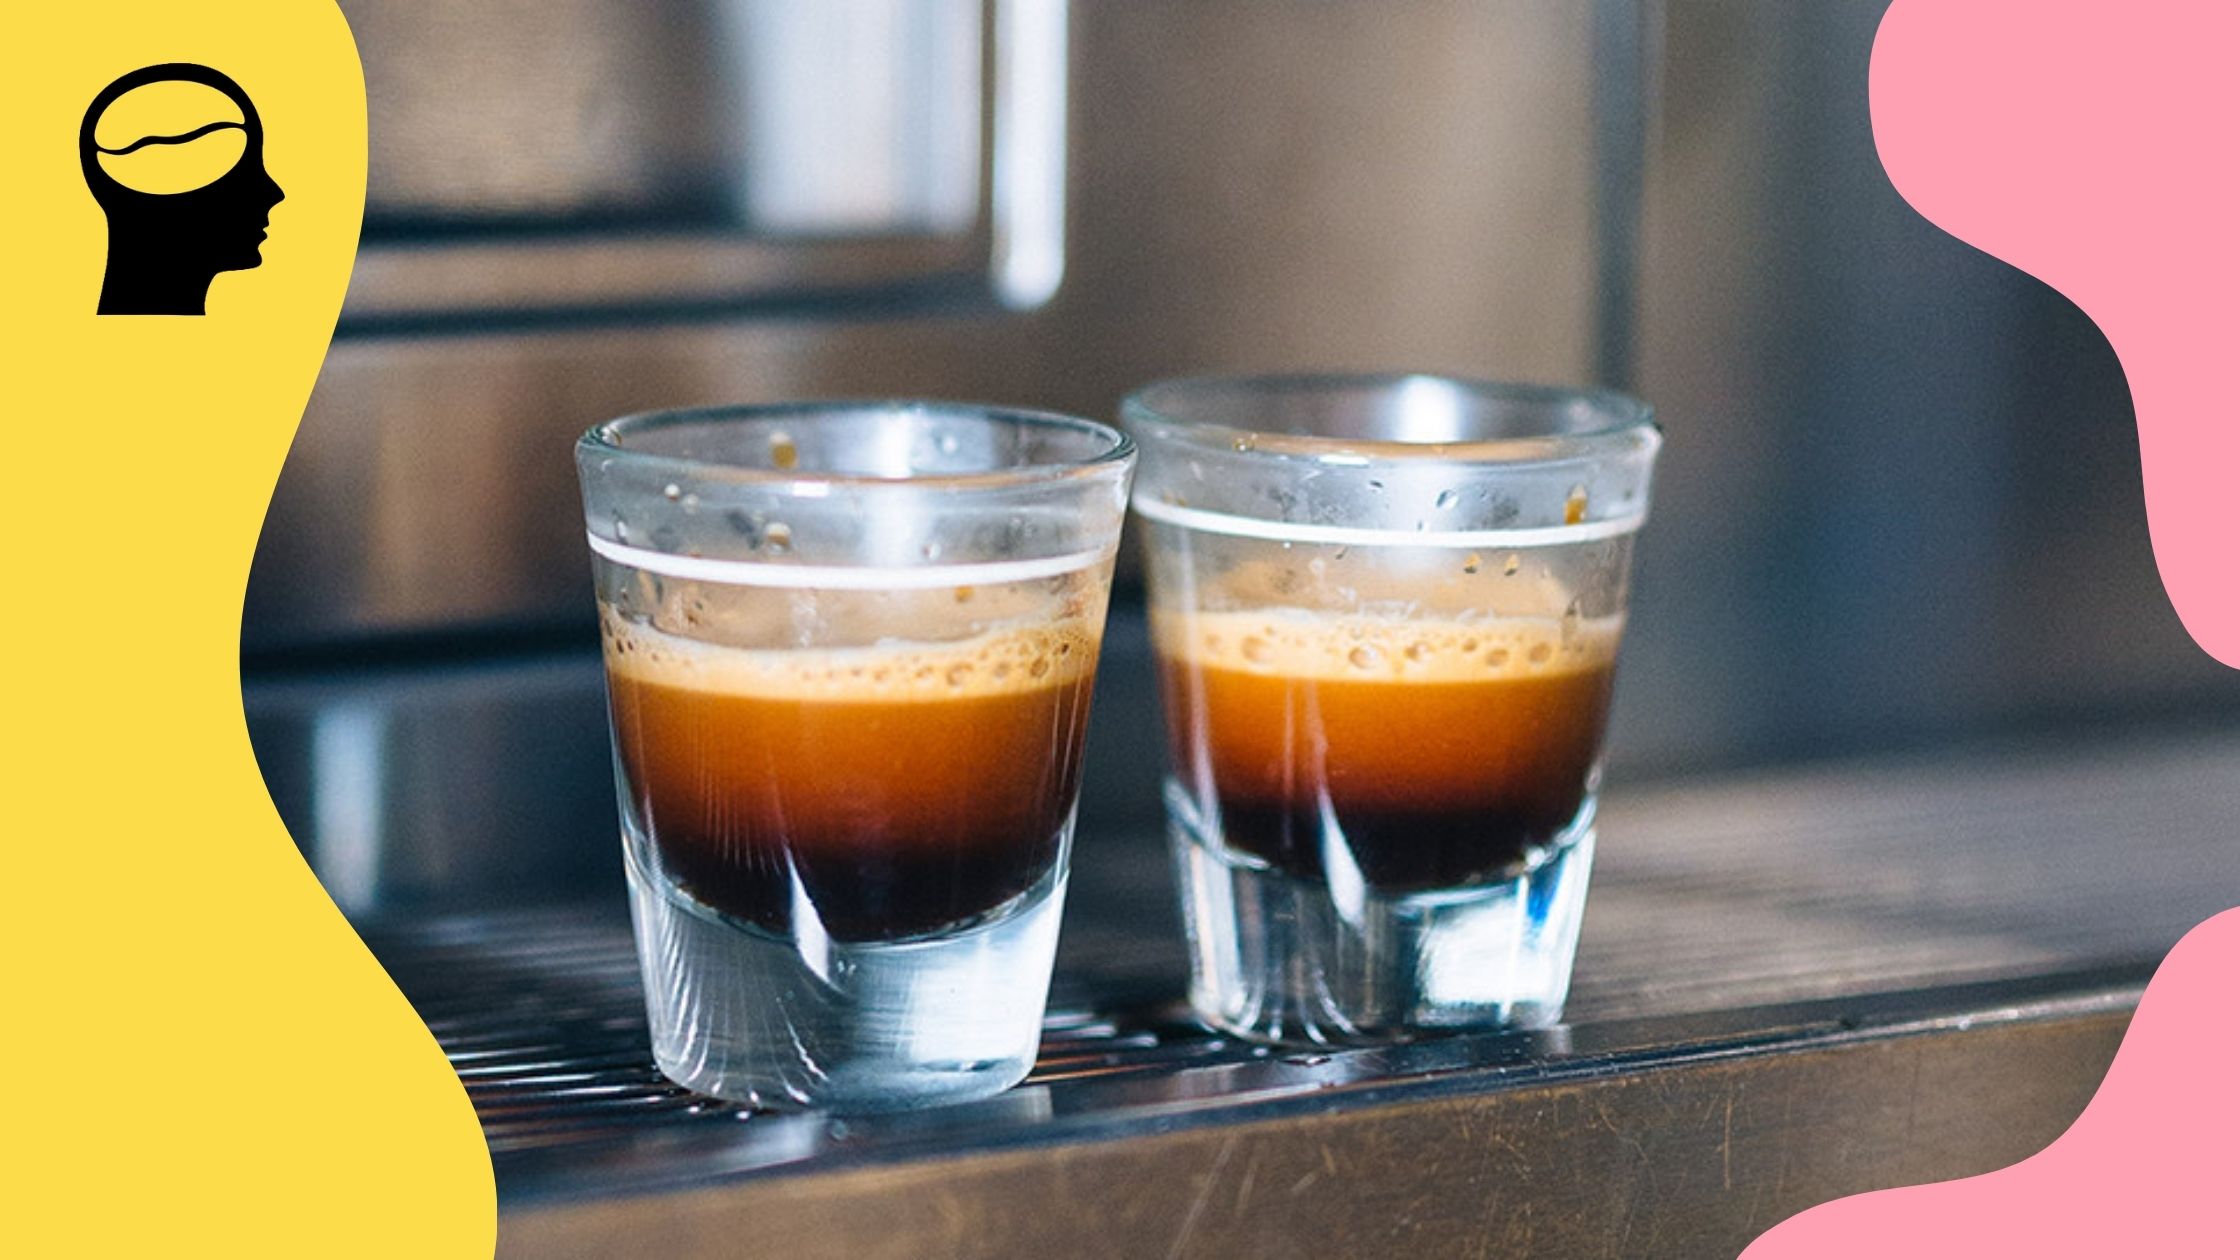 What is a Ristretto?